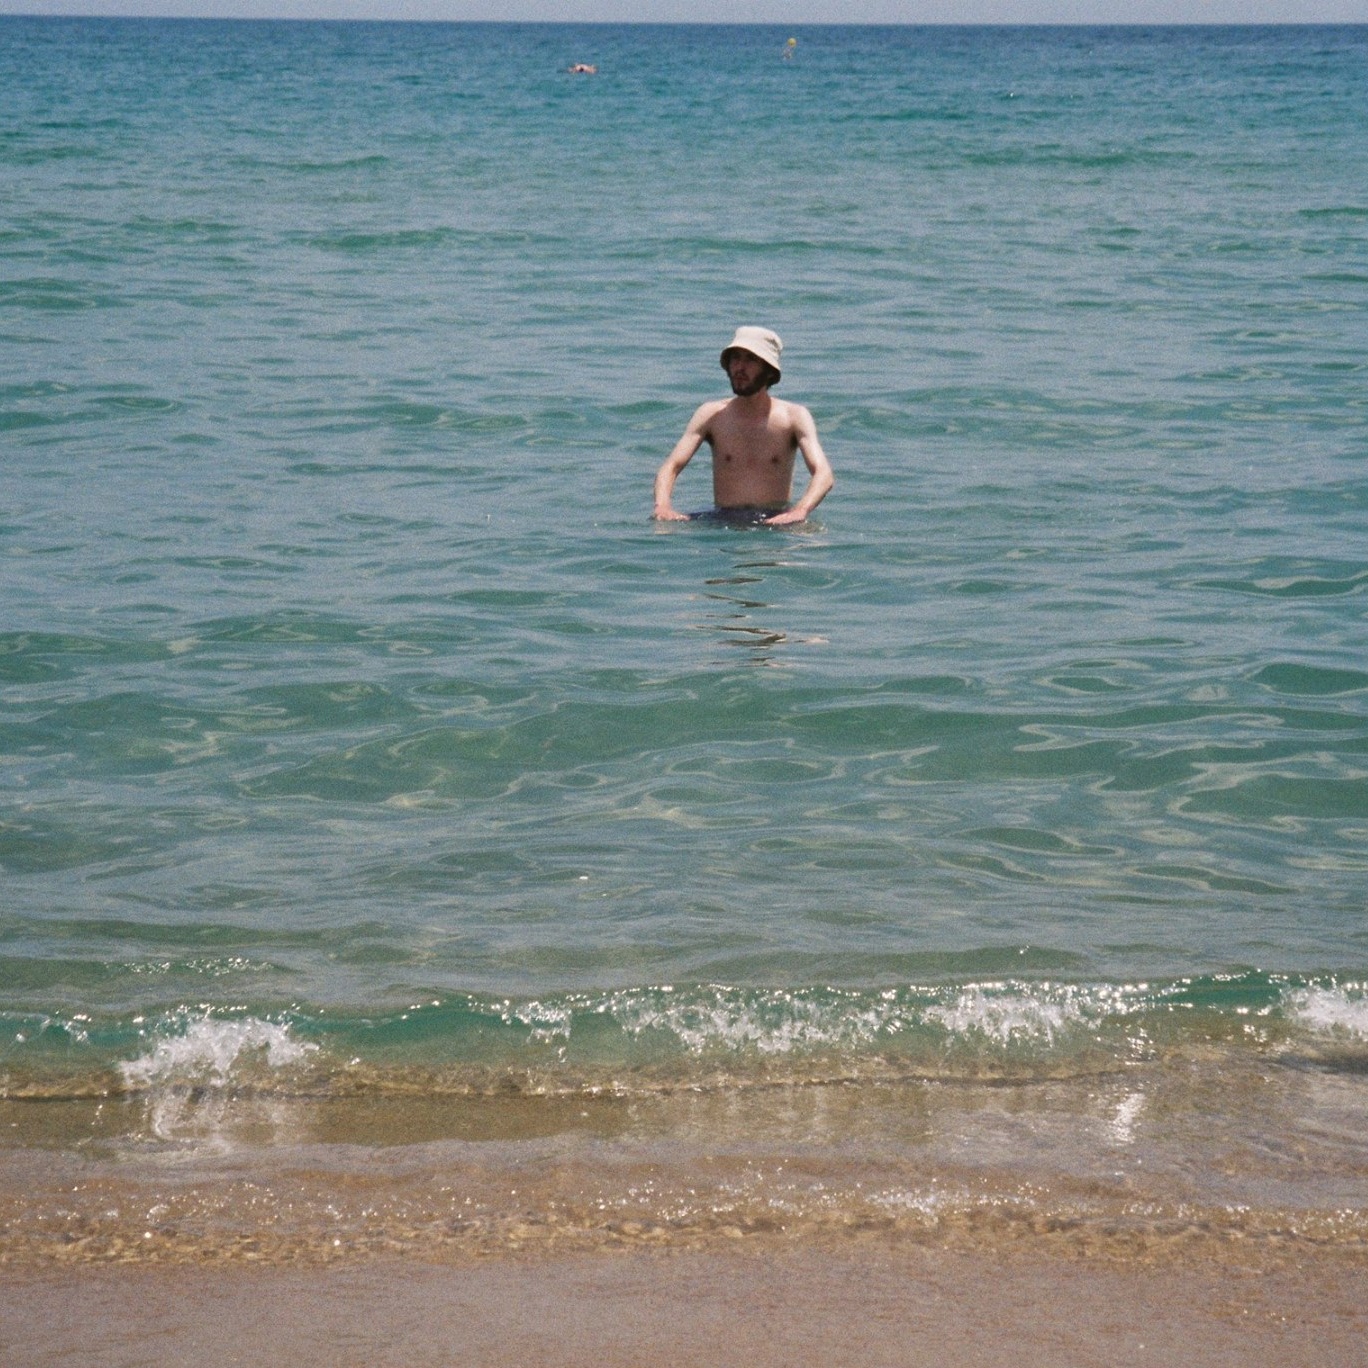 Max (young white man in a hat) pictured at a distance swimming in the sea